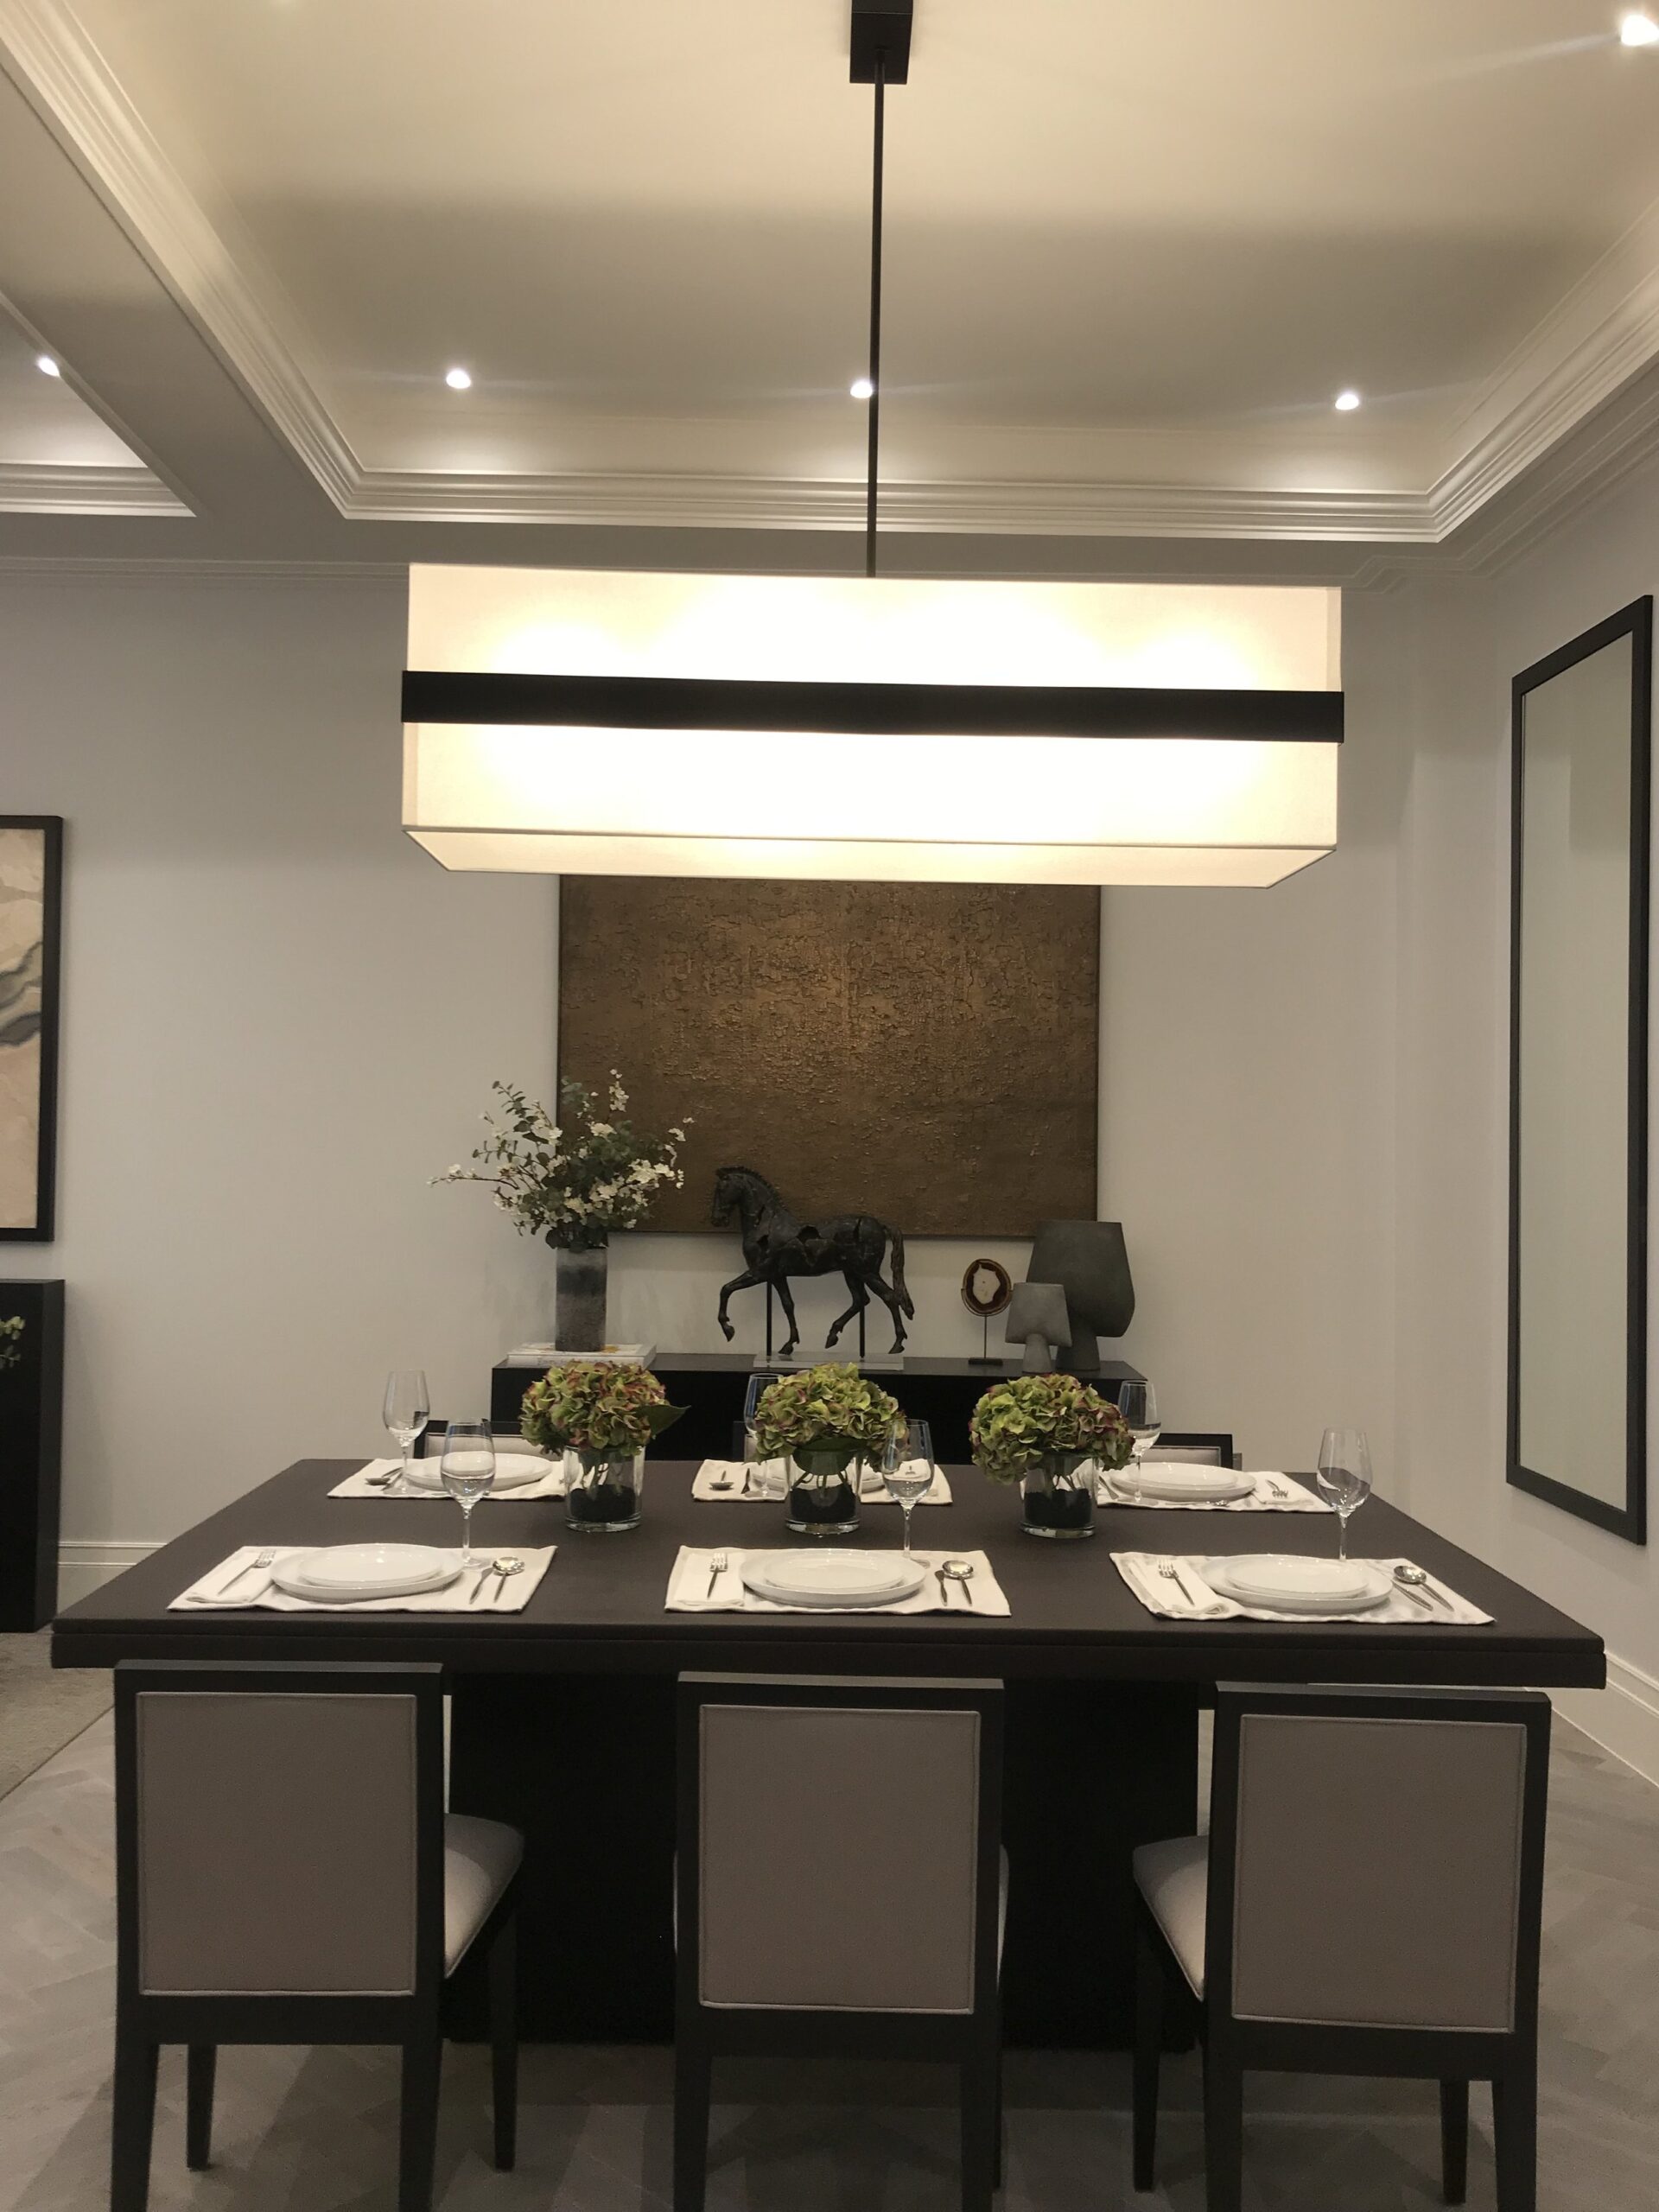 Dining room with low hanging pendant light